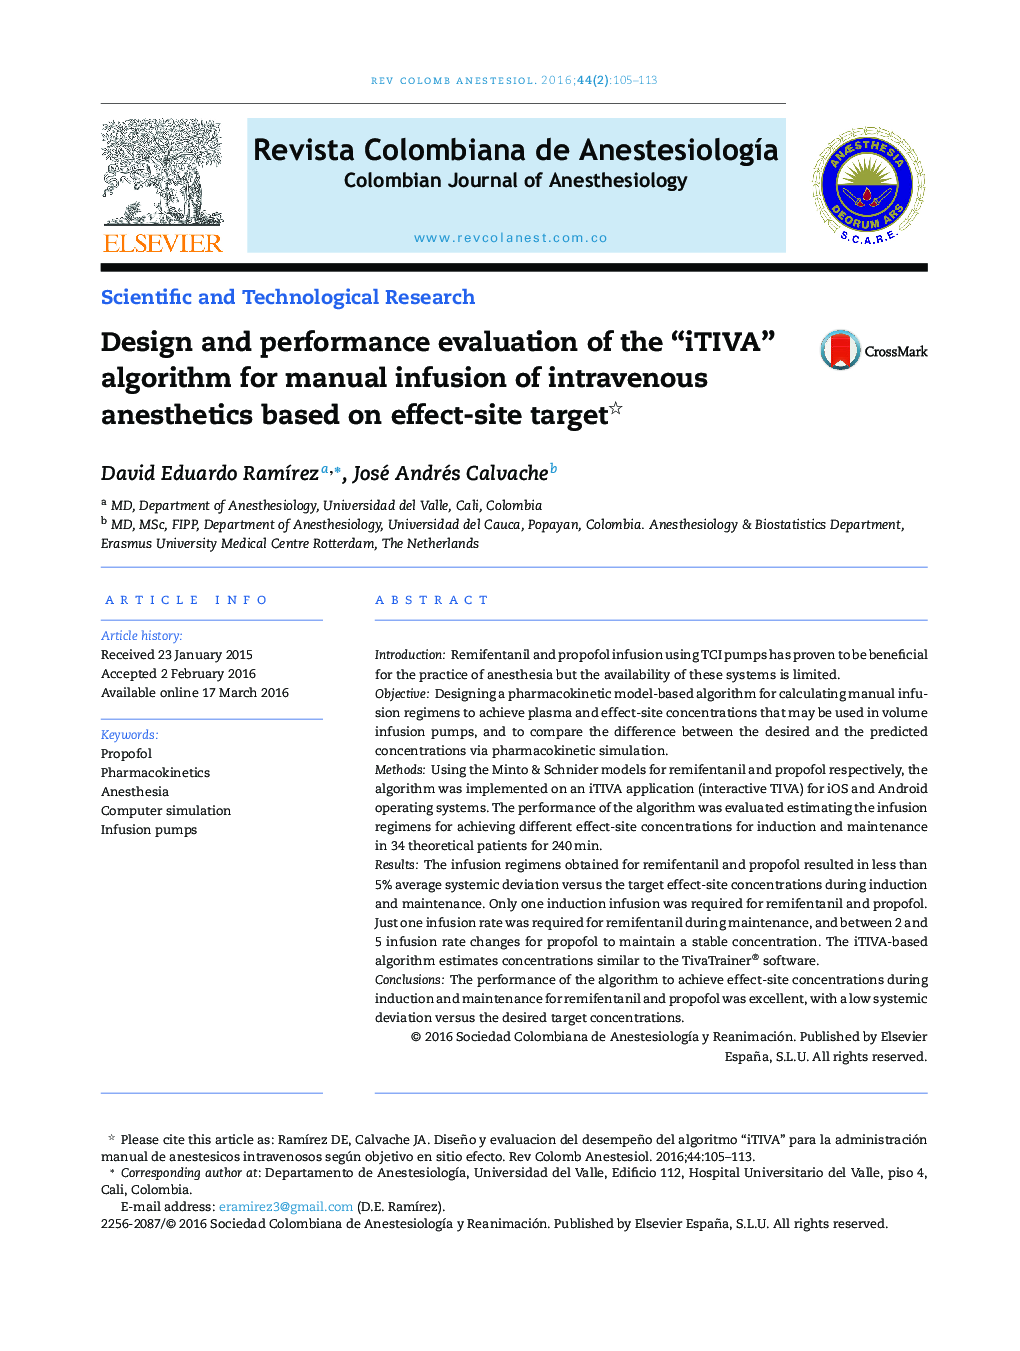 Design and performance evaluation of the “iTIVA” algorithm for manual infusion of intravenous anesthetics based on effect-site target 